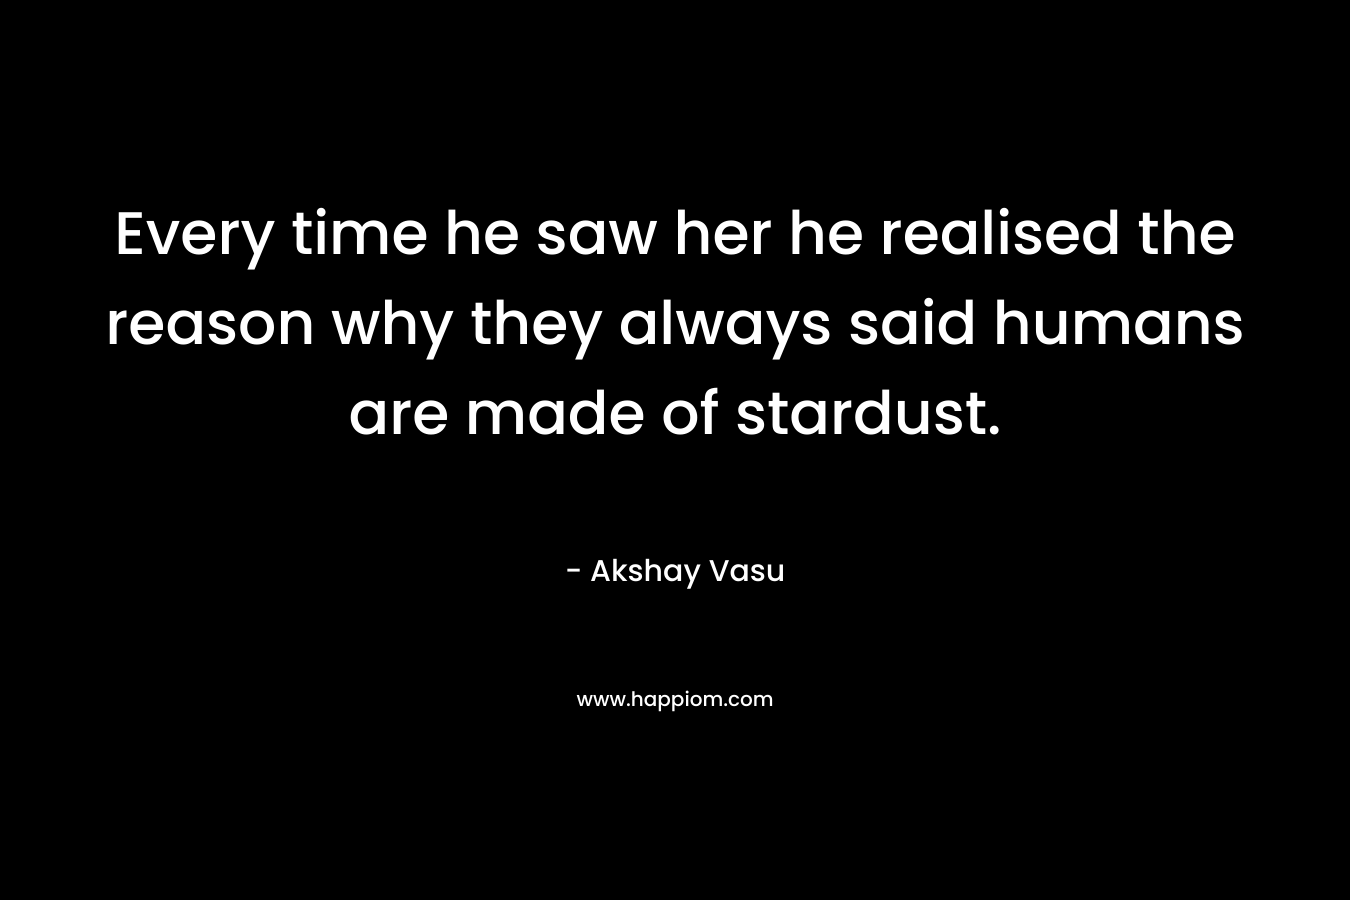 Every time he saw her he realised the reason why they always said humans are made of stardust. – Akshay Vasu